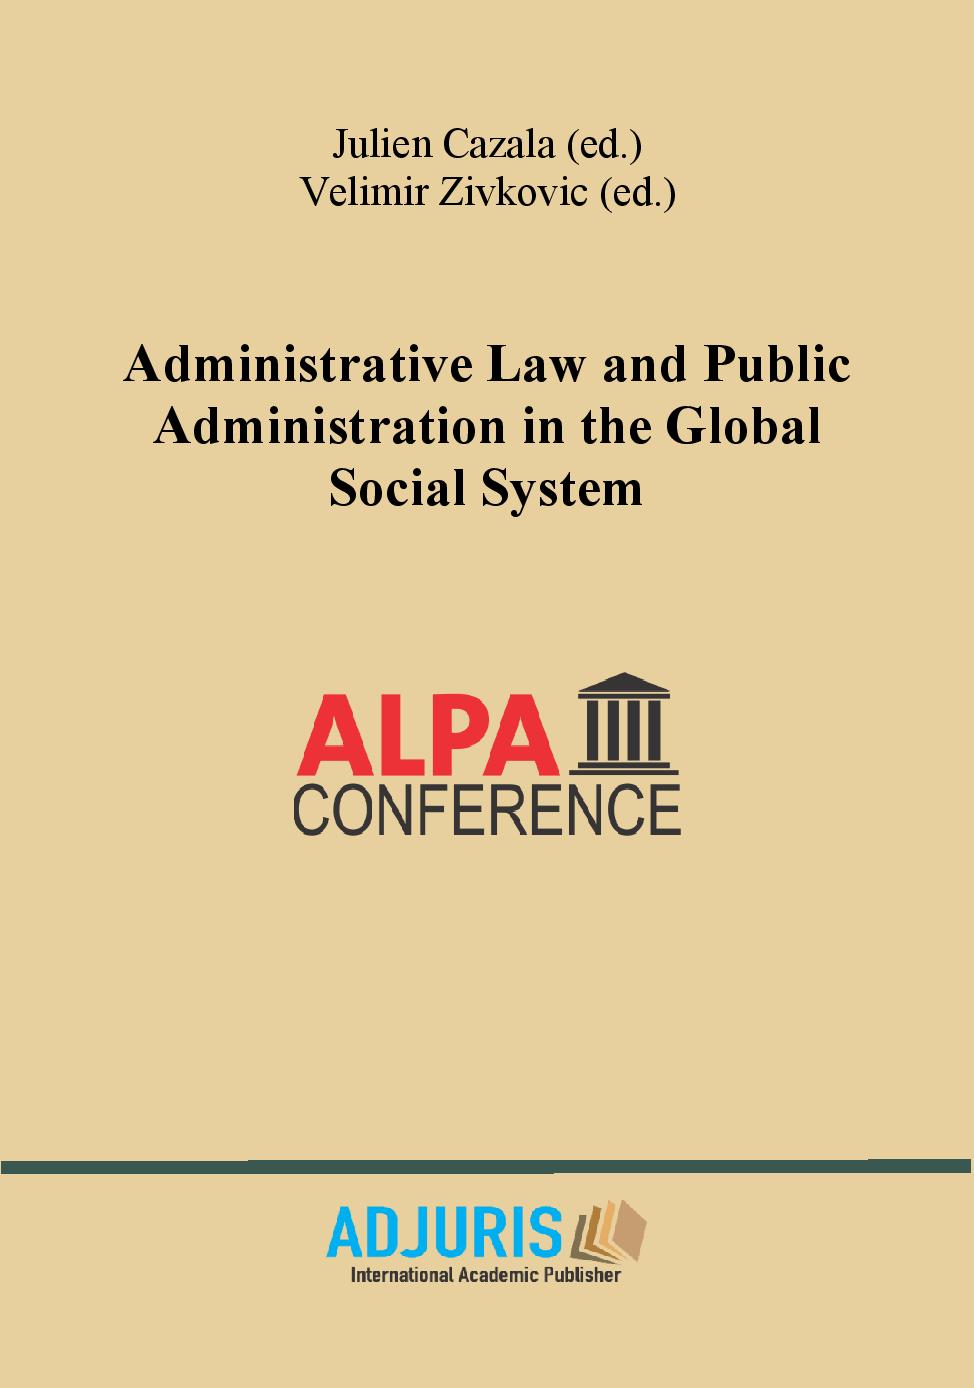 Administrative Law and Public Administration in the Global Social System